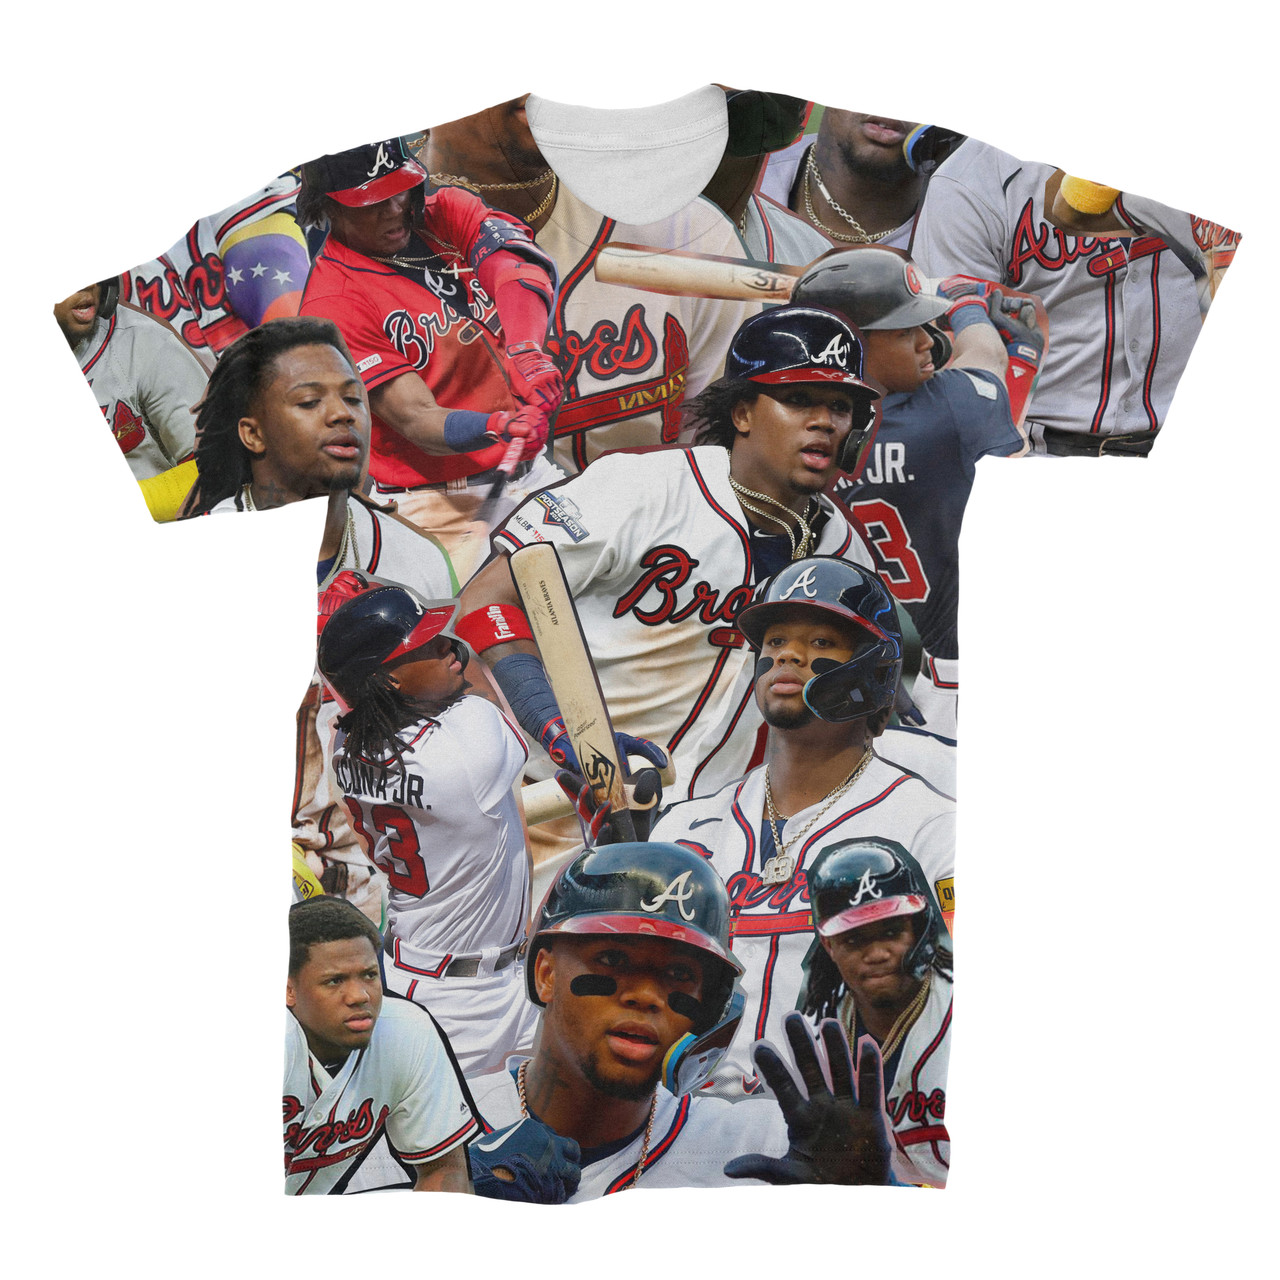 Ronald Acuña Jr. Photo Collage T-Shirt - Subliworks